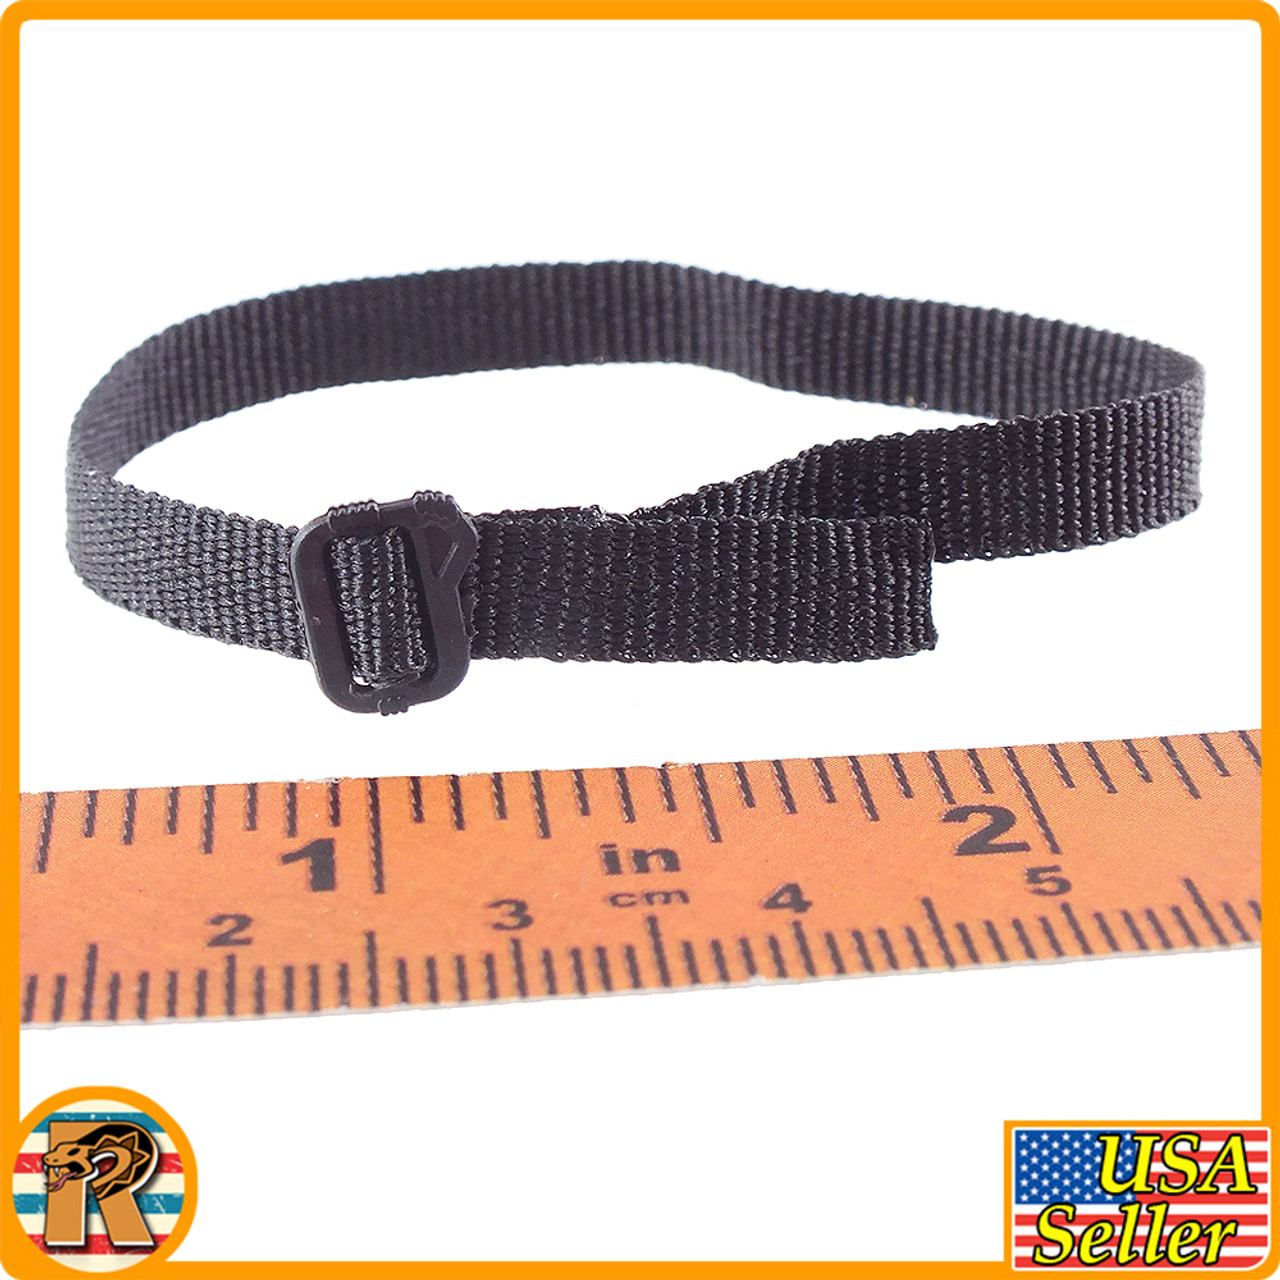 US Army Special Force - Black Cloth Belt - 1/6 Scale -